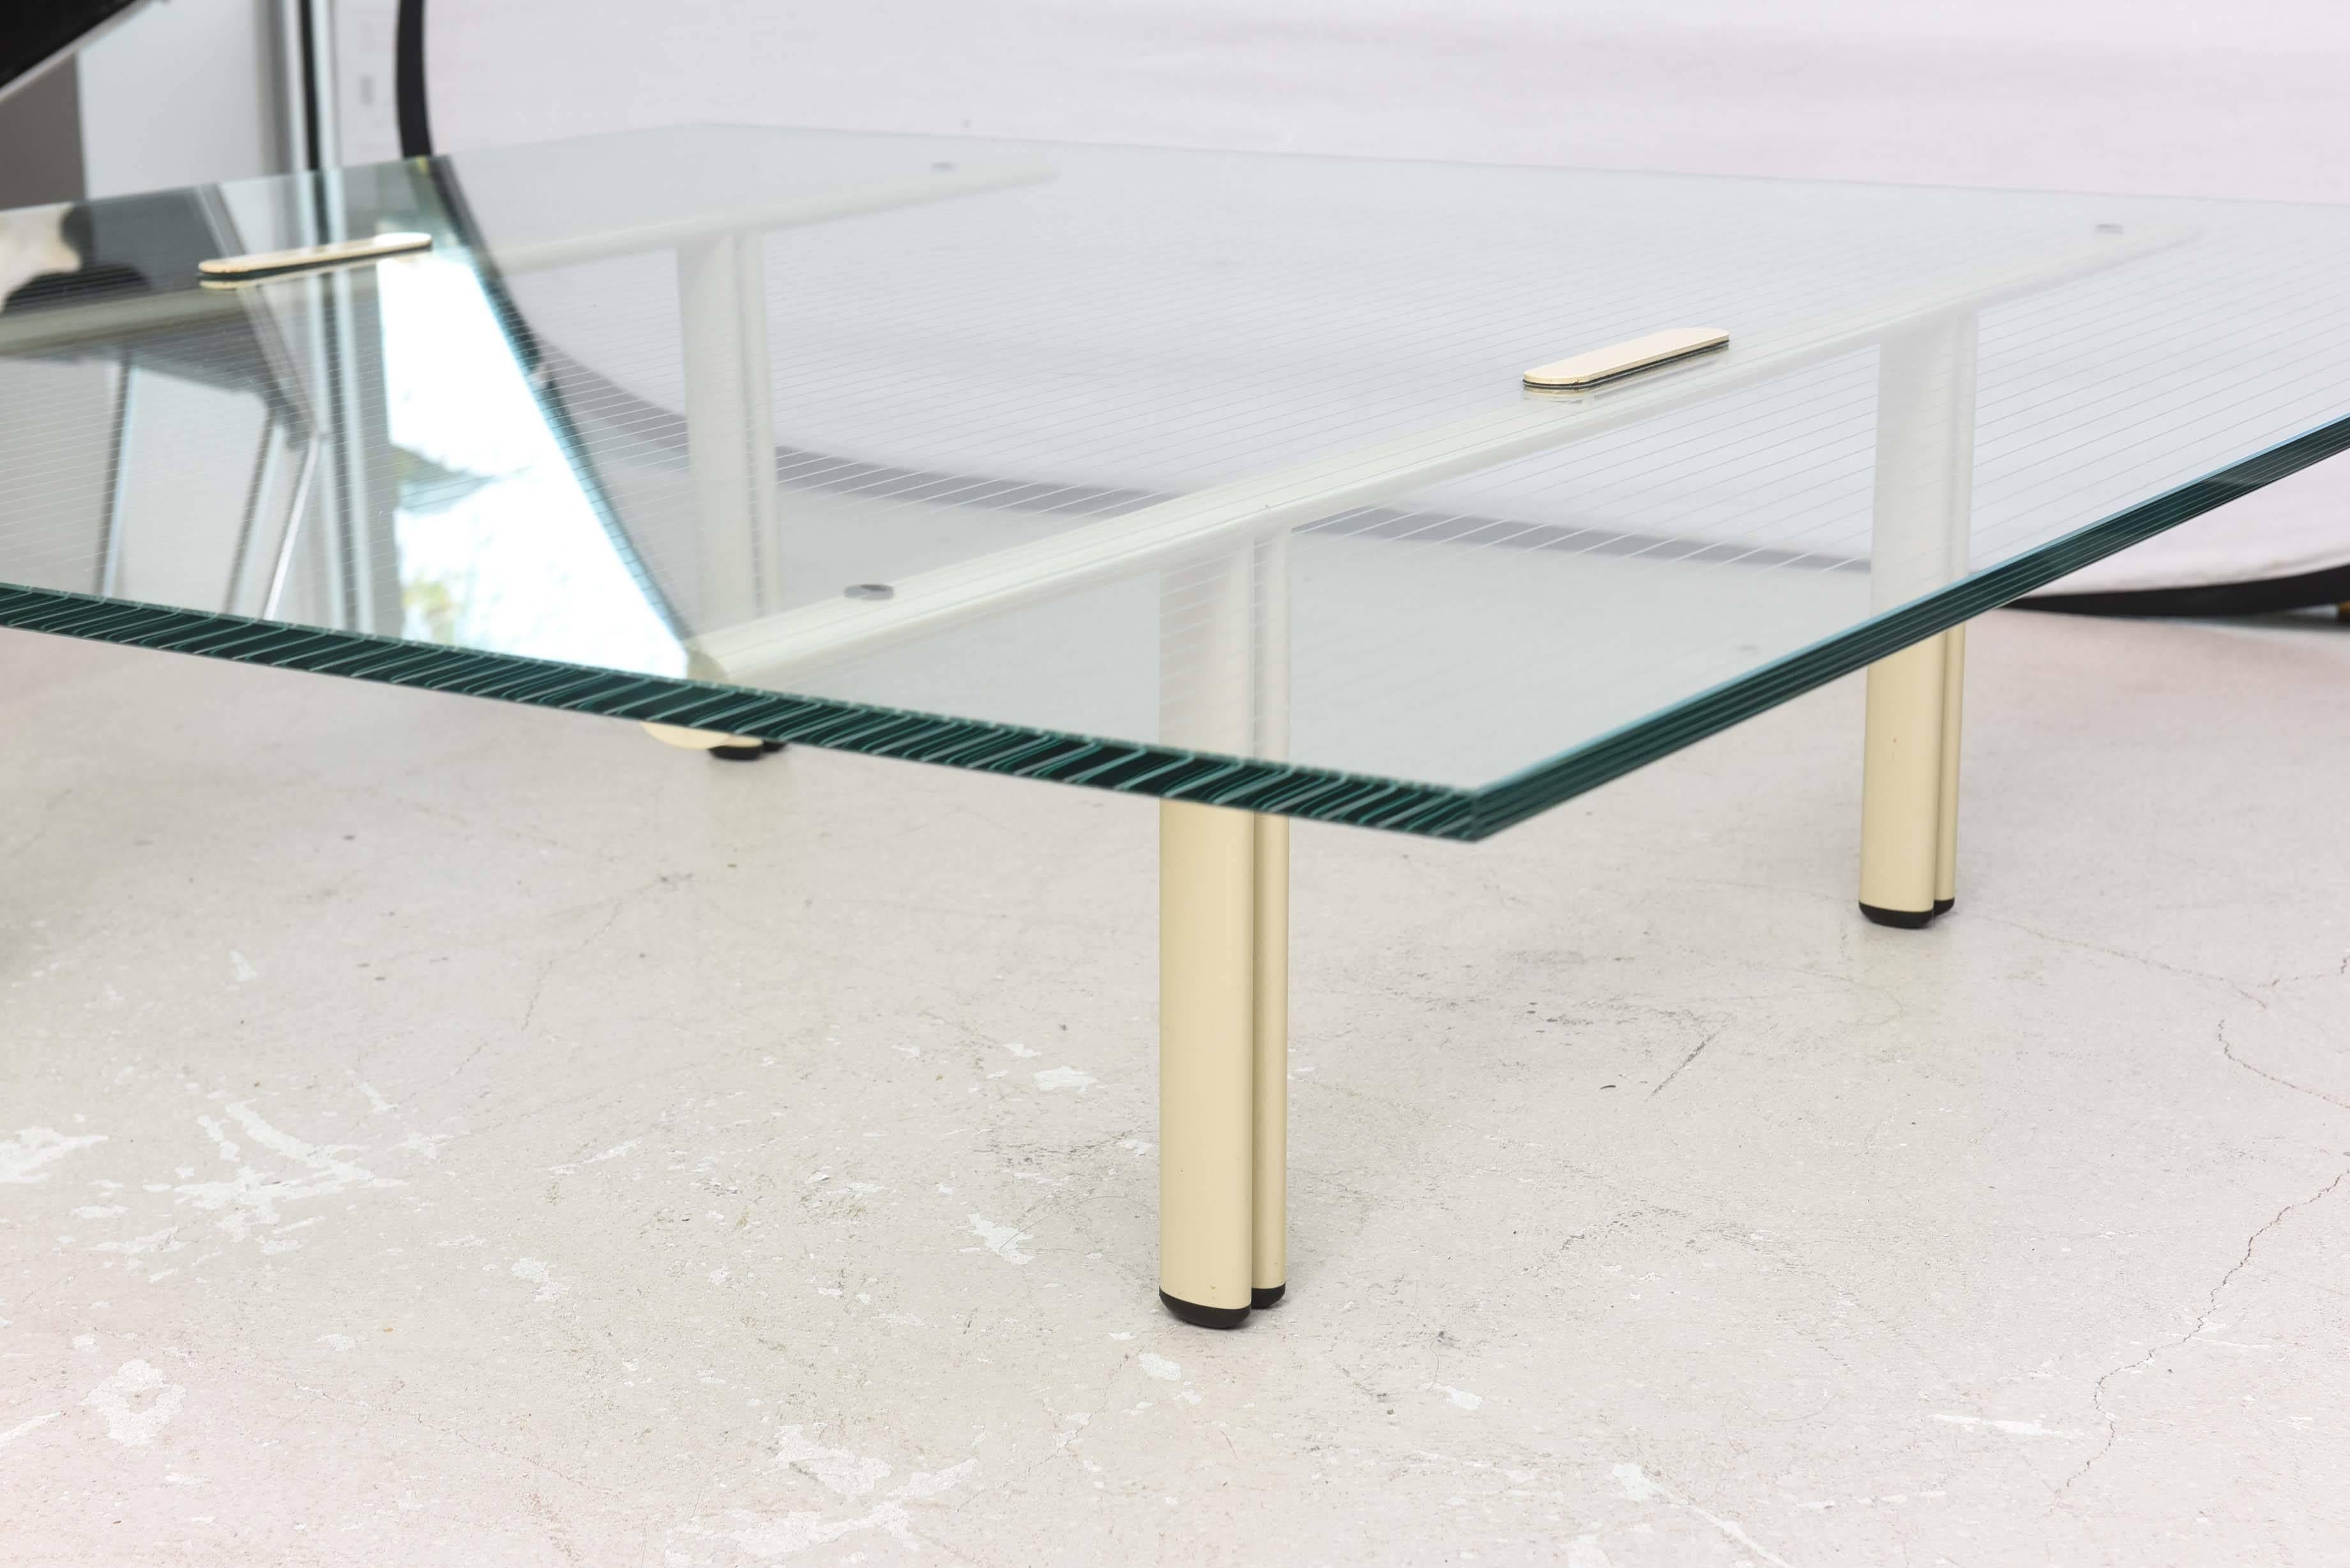 Large coffee table with light cream color enameled metal legs and lightly etched grid pattern on the square glass top.